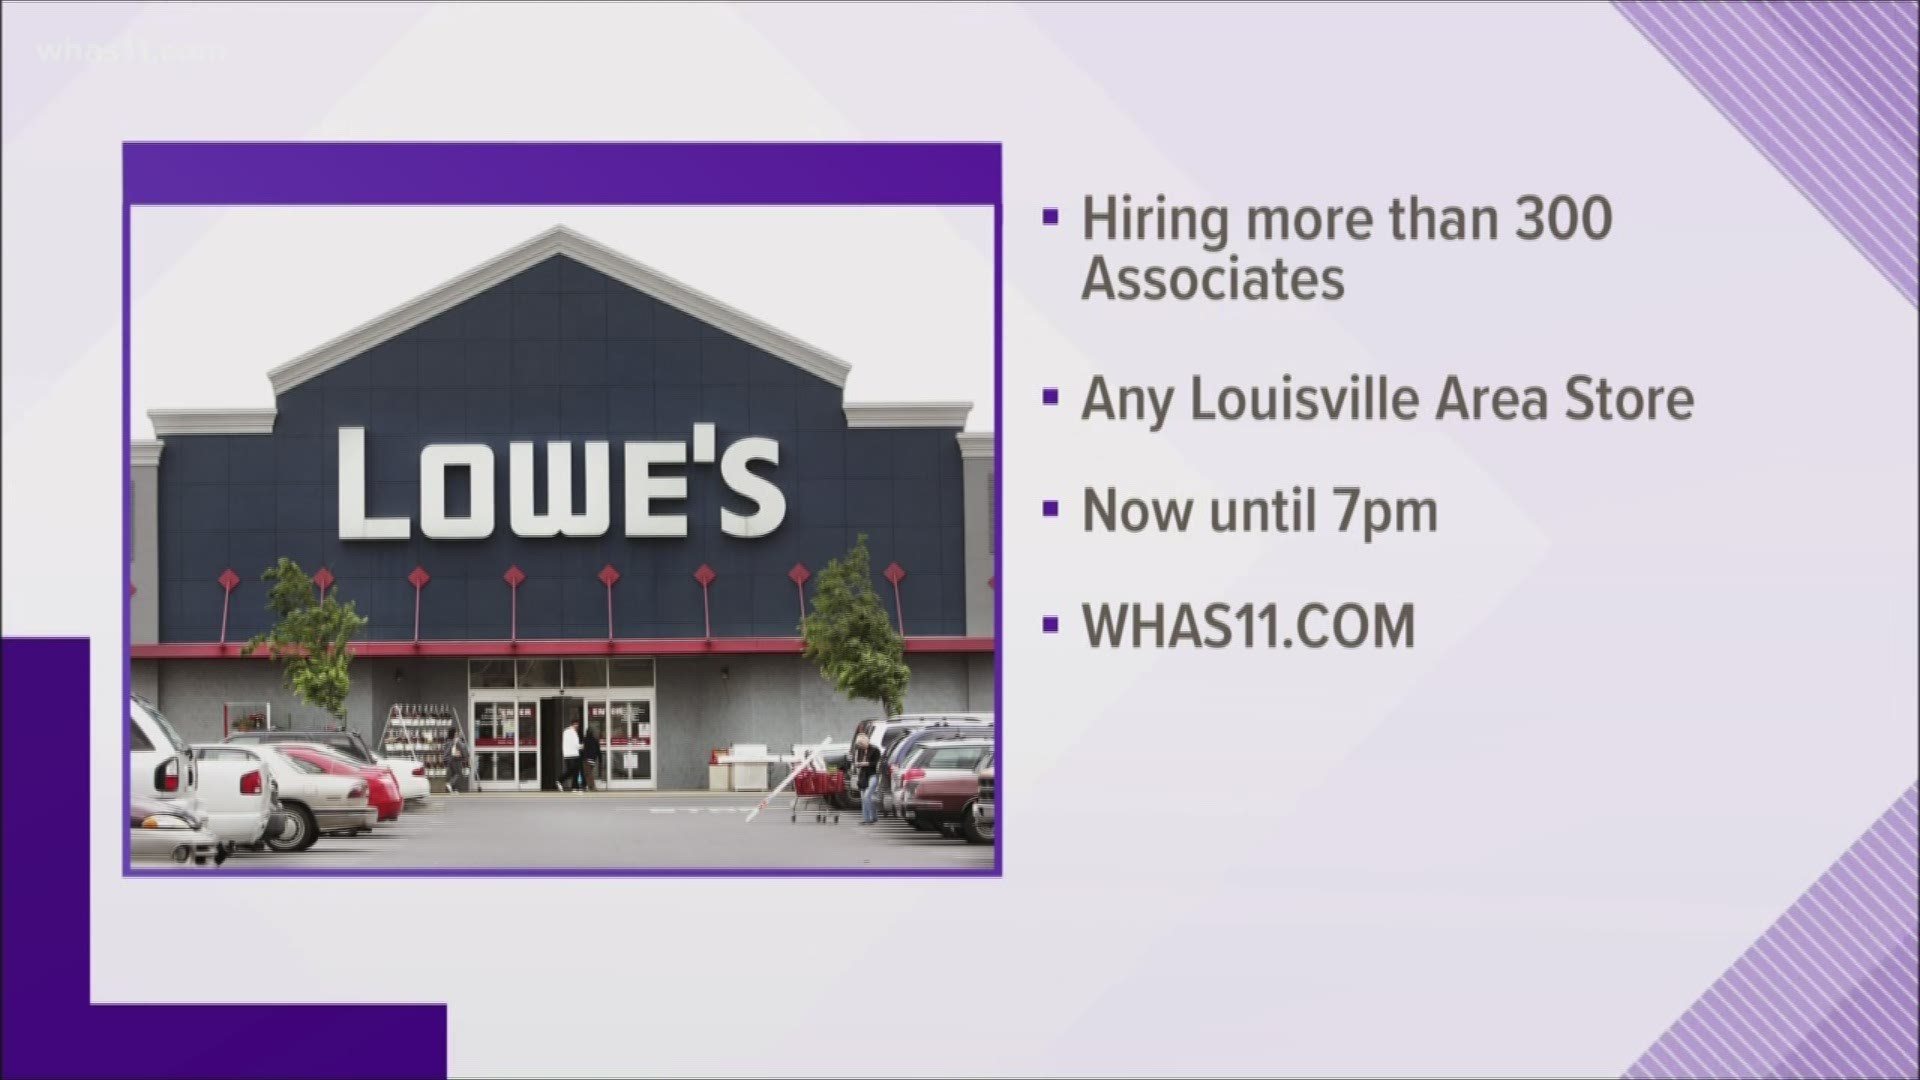 Applicants can walk into any local Lowe's from 10 a.m. to 7 p.m. for an interview.